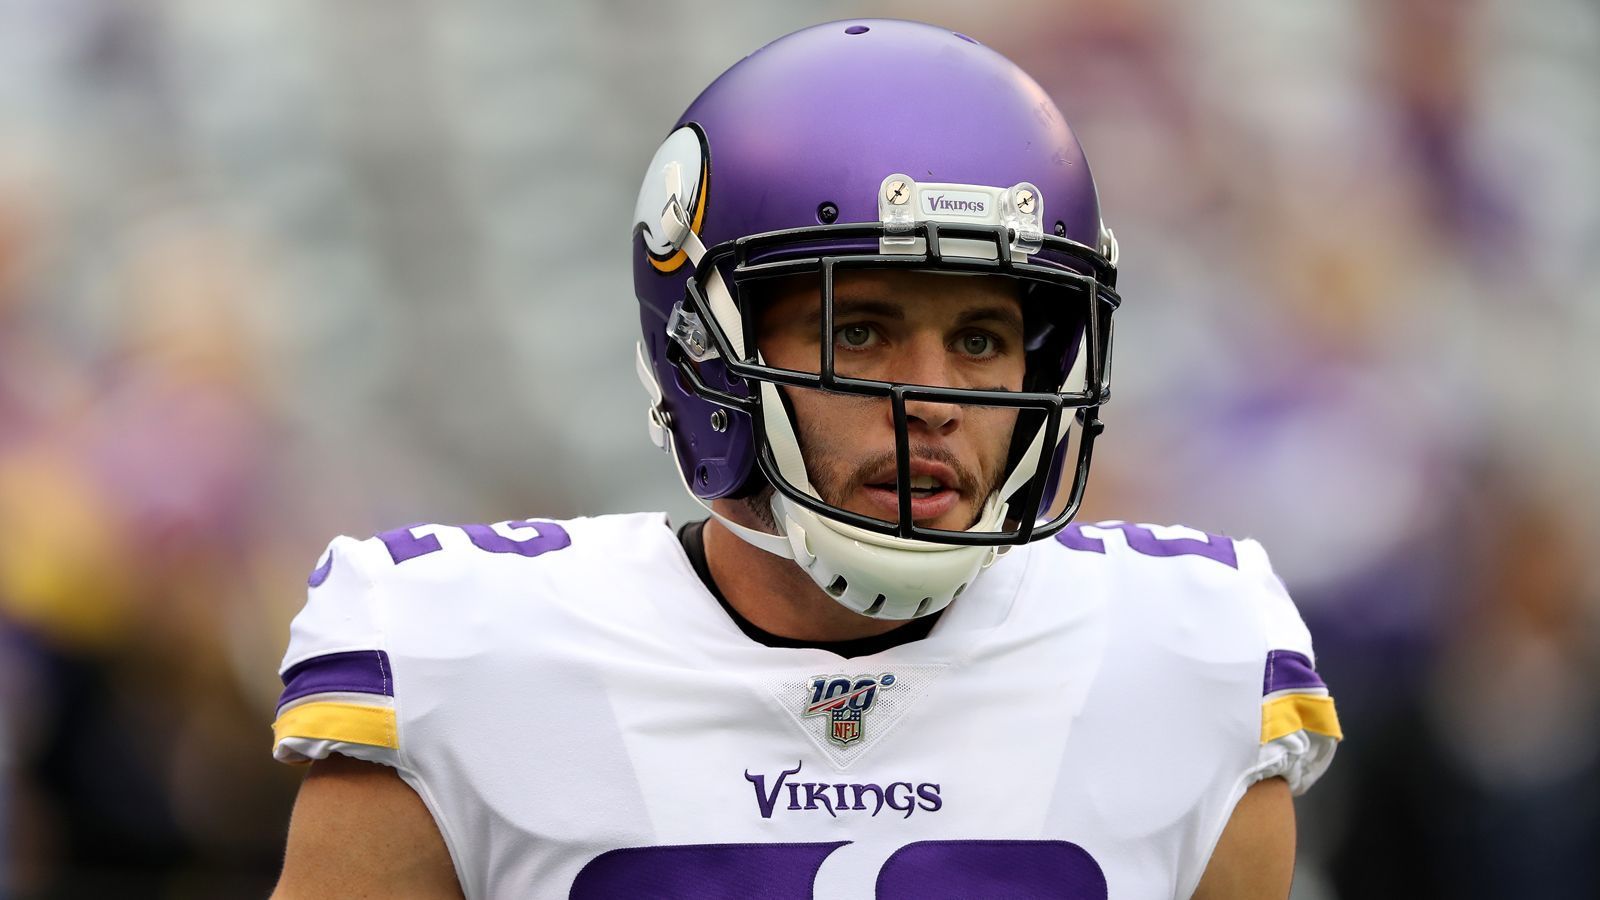 
                <strong>Platz 7 (geteilt): Harrison Smith</strong><br>
                &#x2022; Team: Minnesota Vikings<br>&#x2022; Position: Strong Safety<br>&#x2022; <strong>Overall Rating: 90</strong><br>&#x2022; Beste Key Stats: Agility: 91 - Stamina: 93 - Hit Power: 93<br>
              